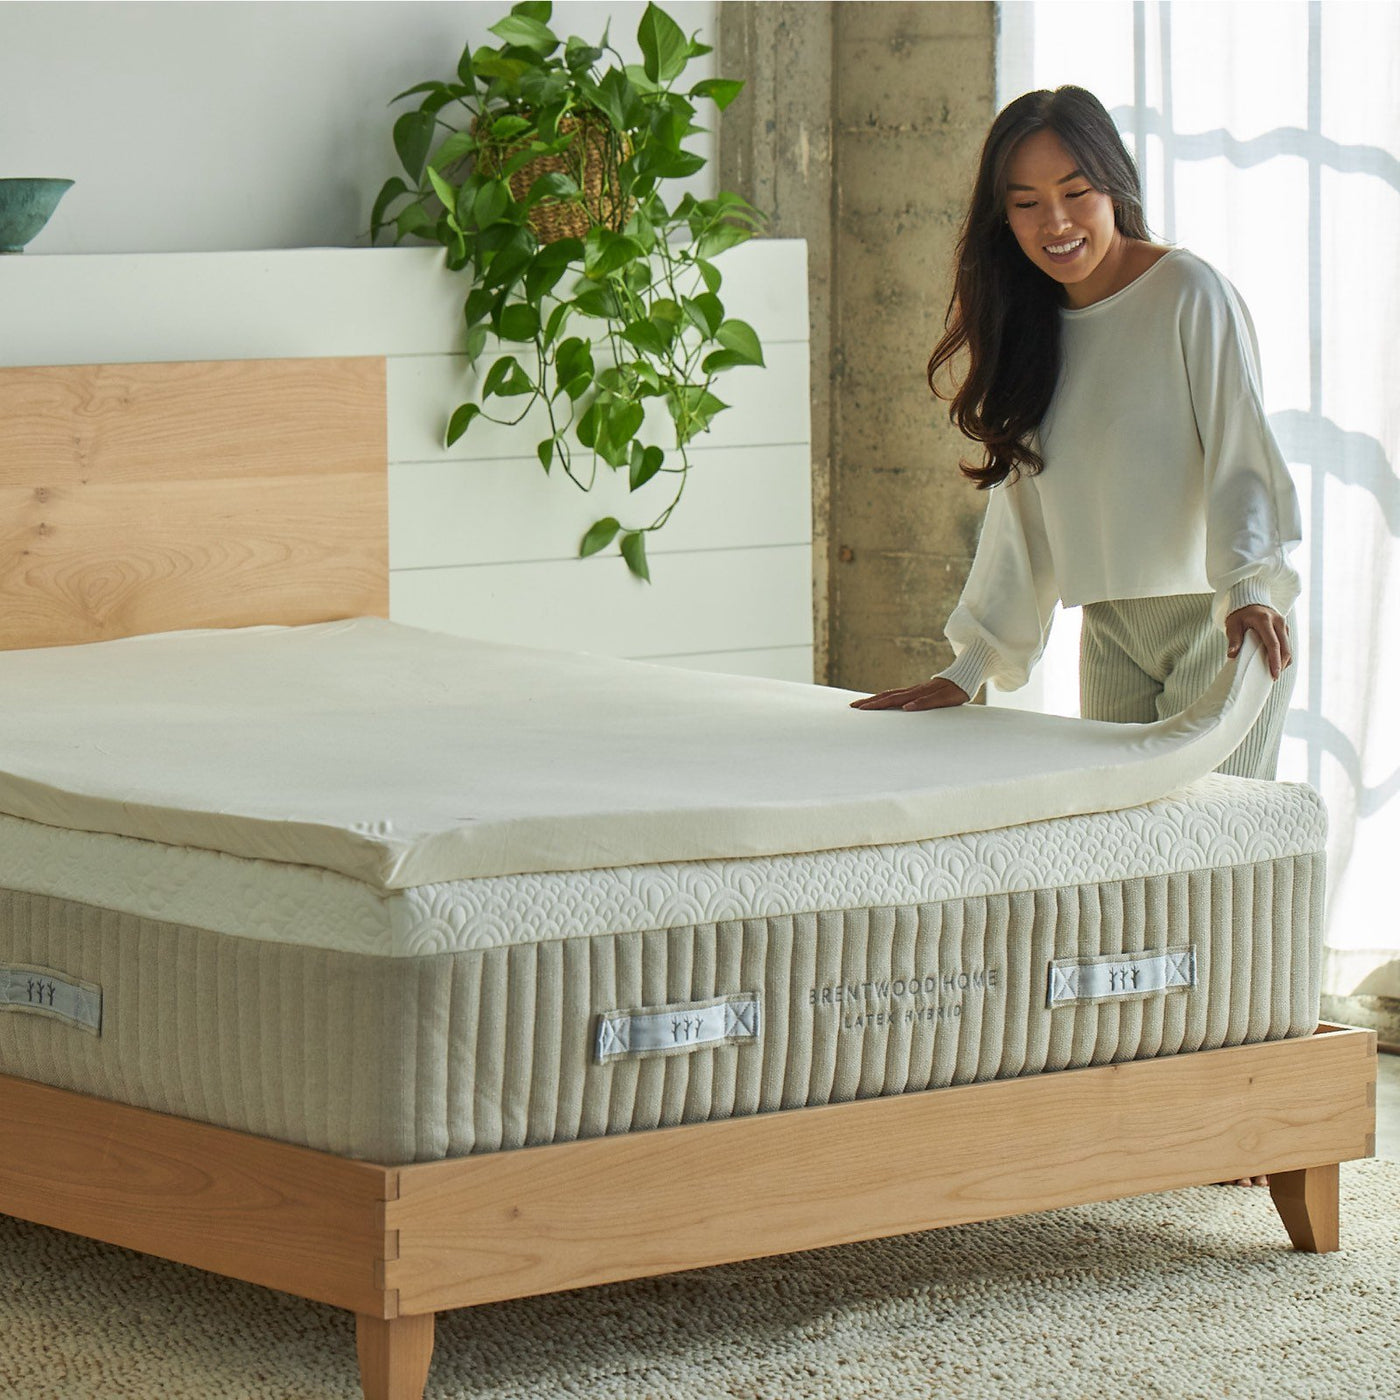 How to Cut A Memory Foam Mattress? Works For Mattress Toppers Too